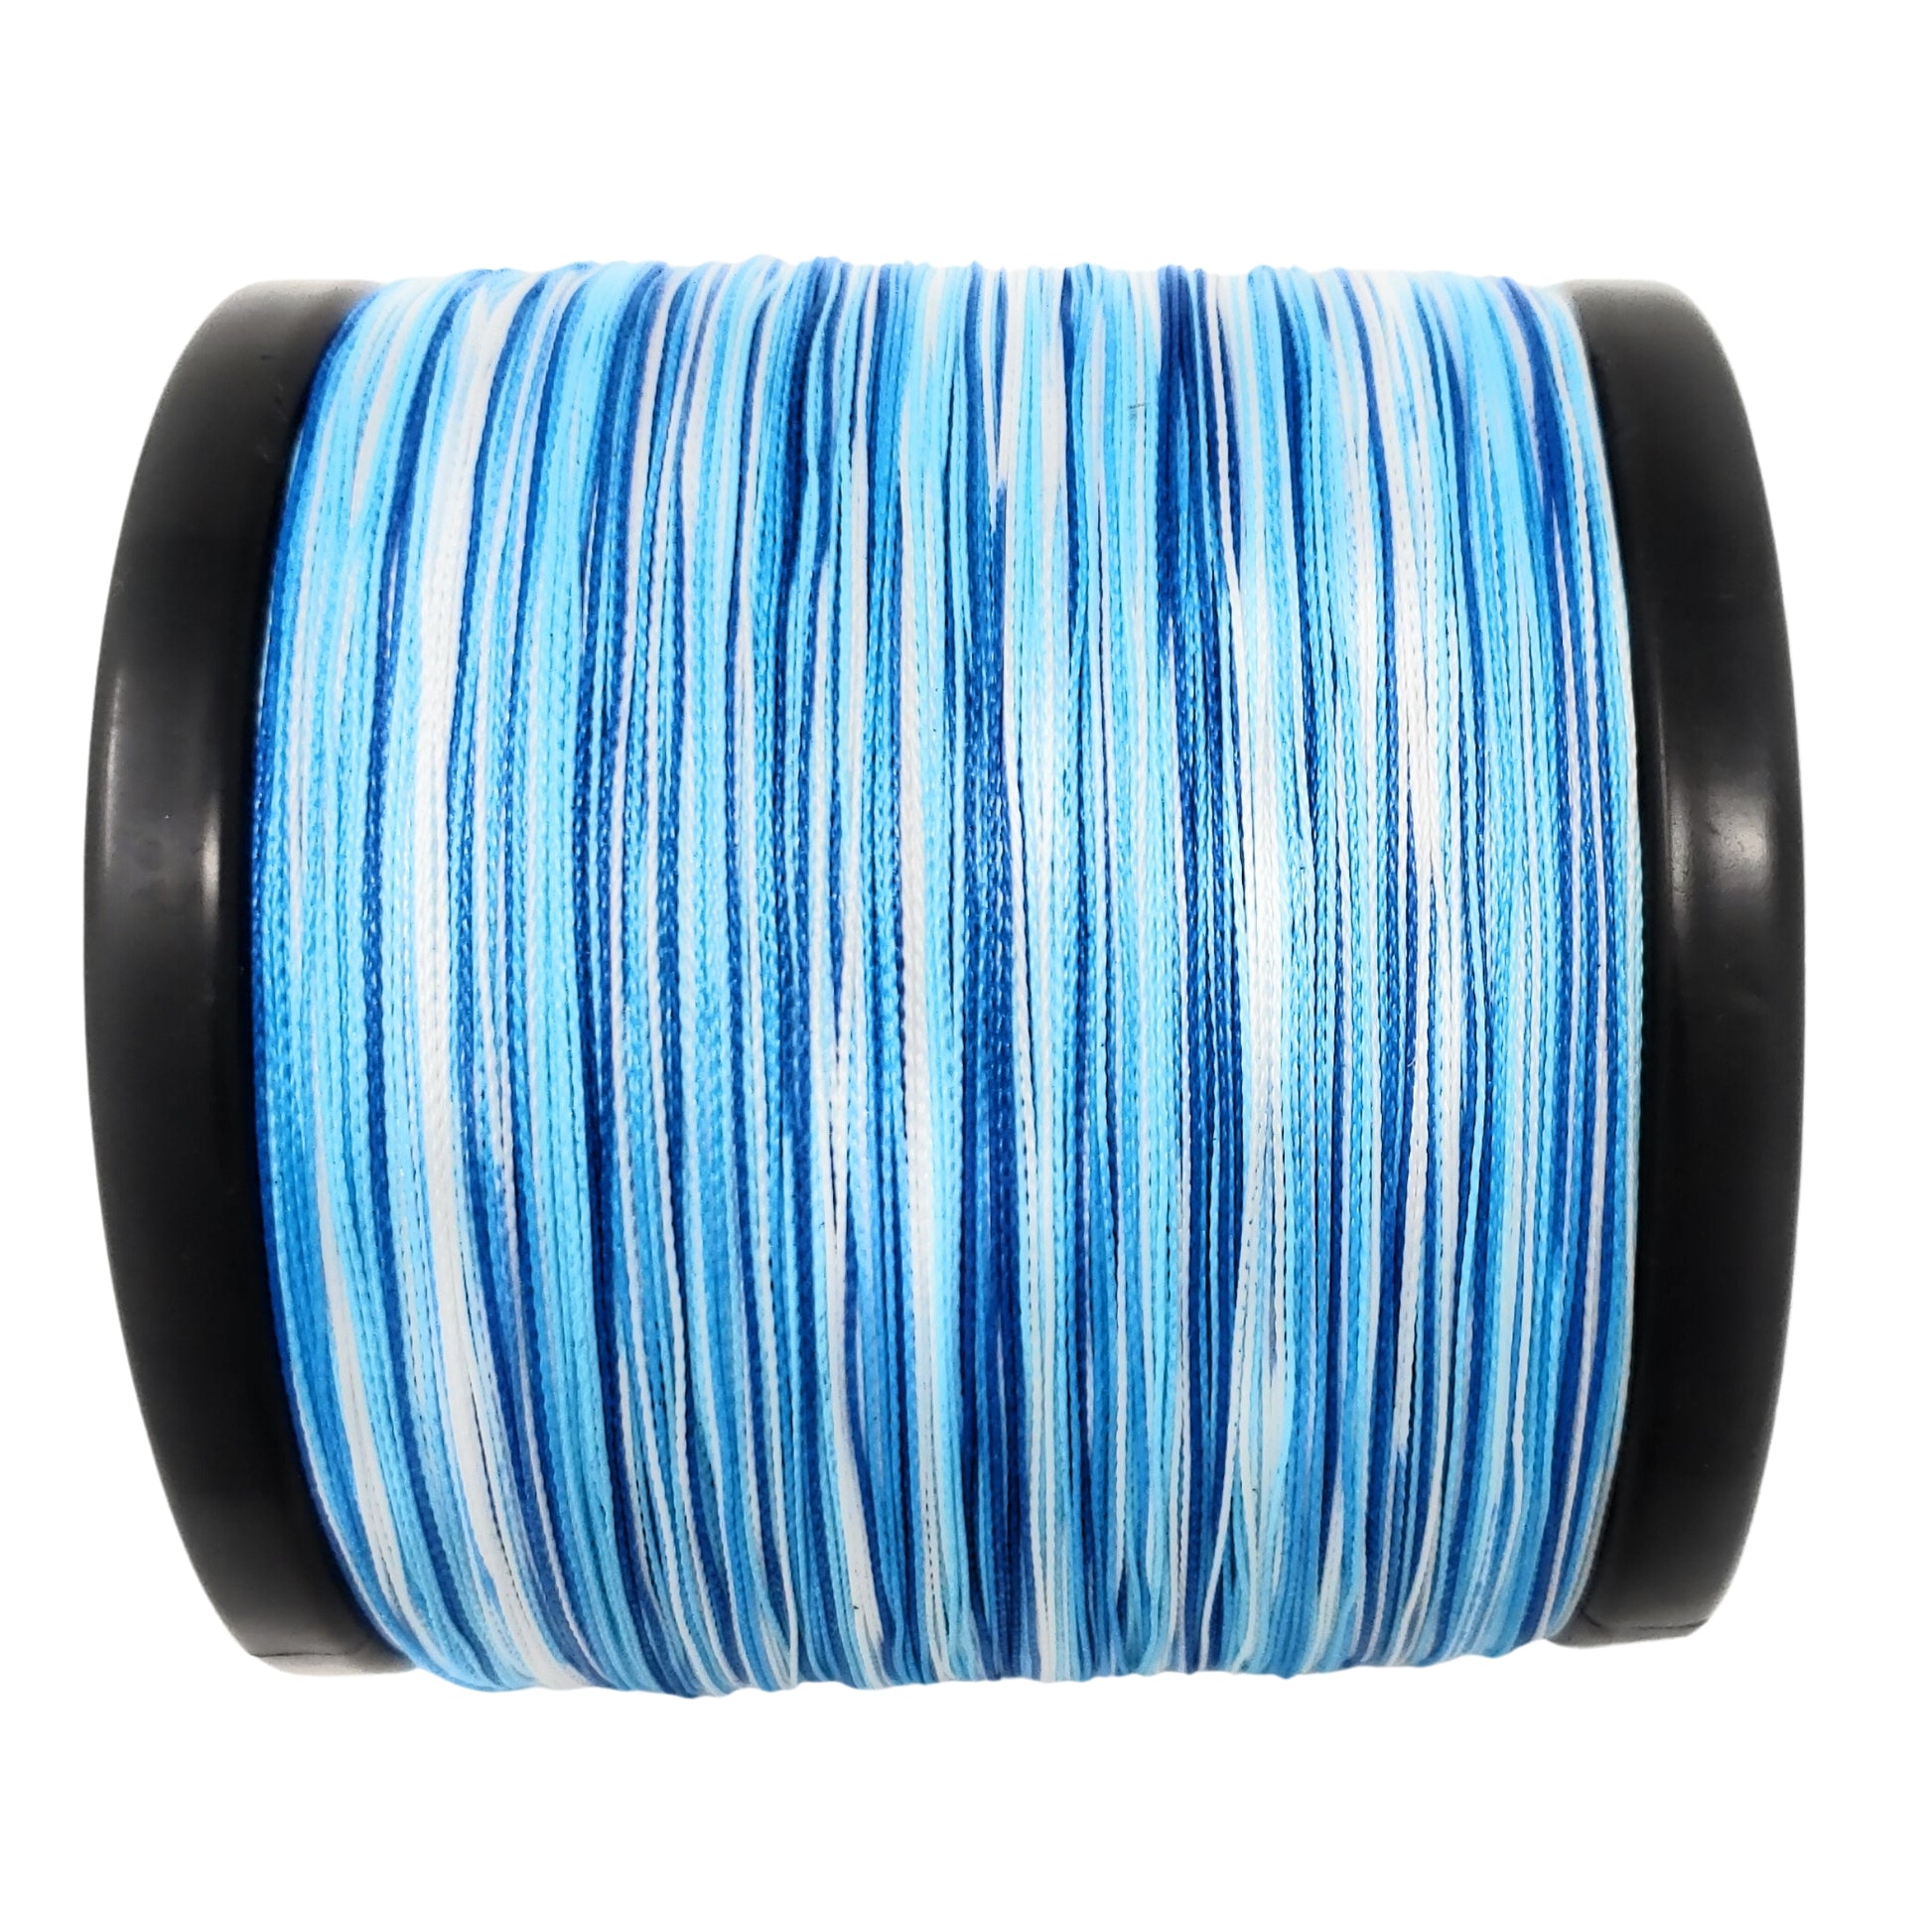 Reaction Tackle Braided Fishing Line Blue Camo 80lb 1000yd